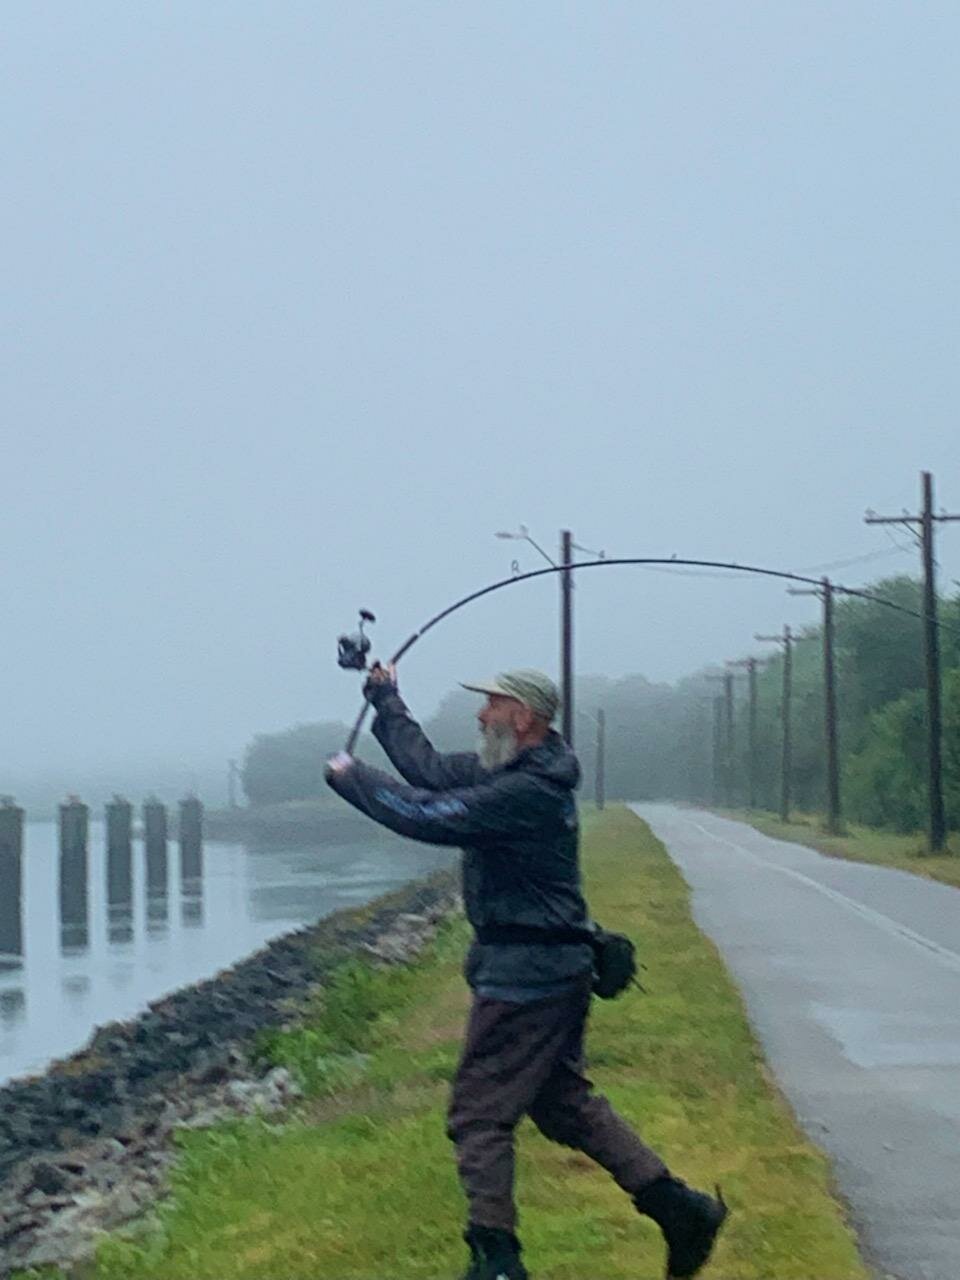 Bob “Bull” Mackinnon, loading up his rod for a Cape Cod Canal cast to stiped bass earlier this week. Photo submitted by Ed Doherty.